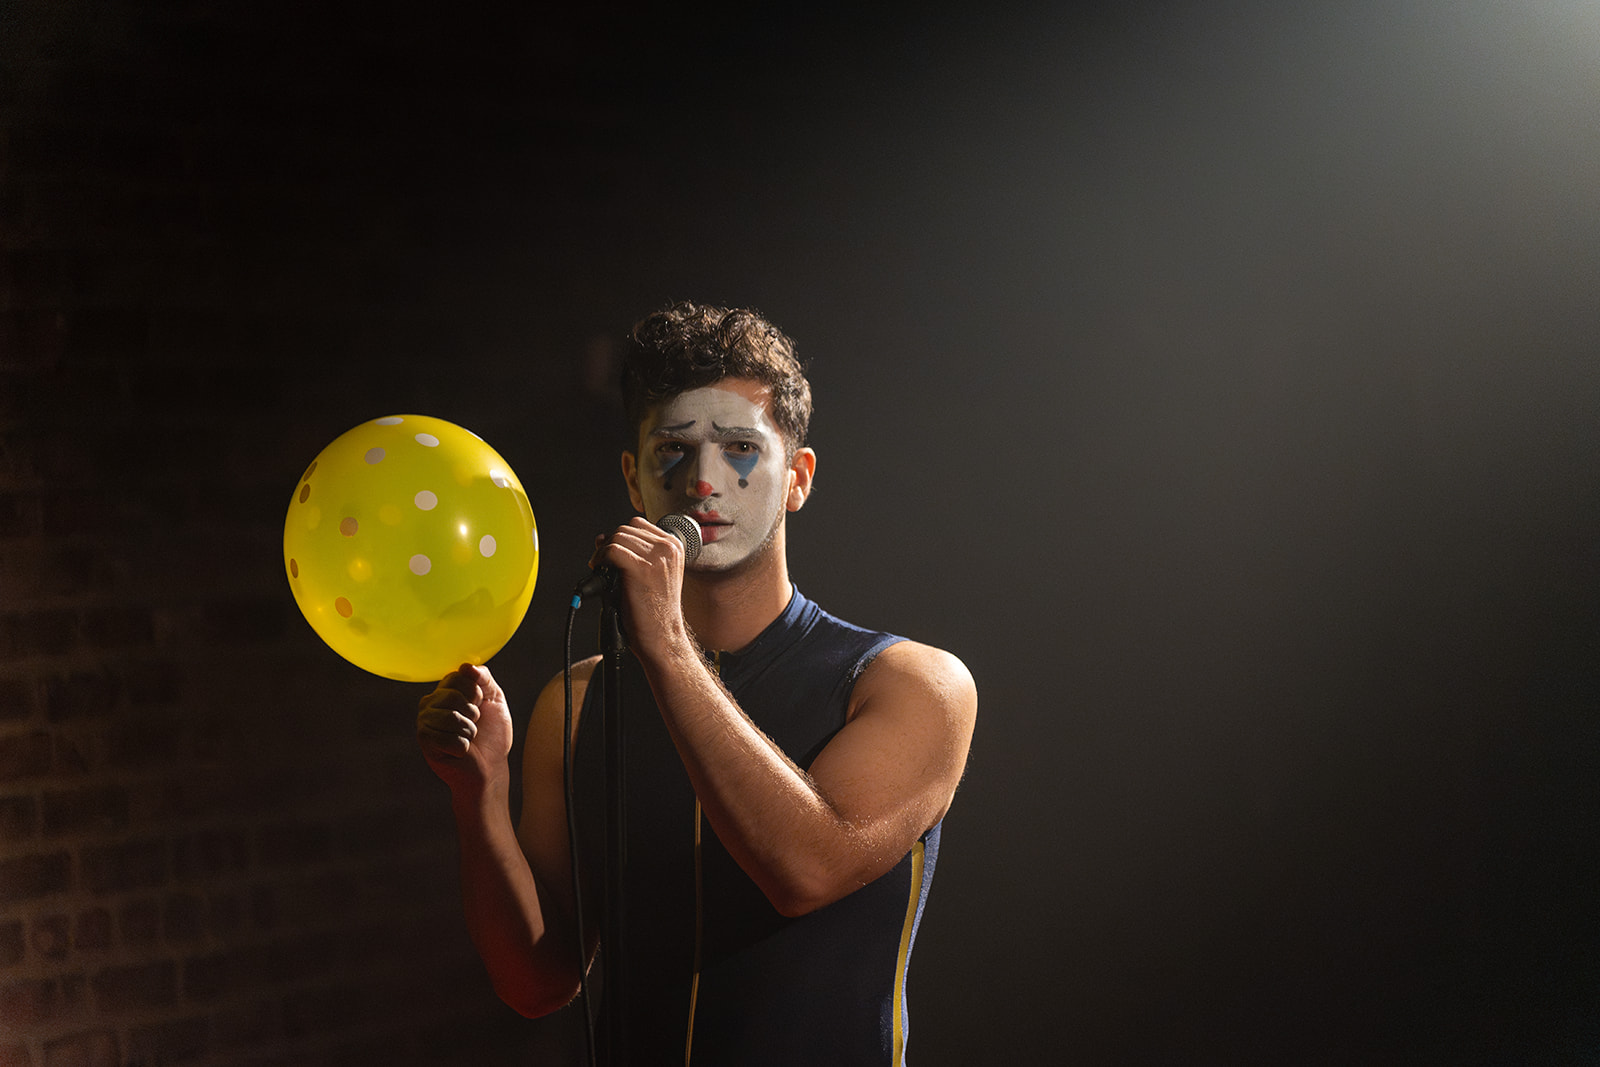 photo of me at a mic holding a balloon.